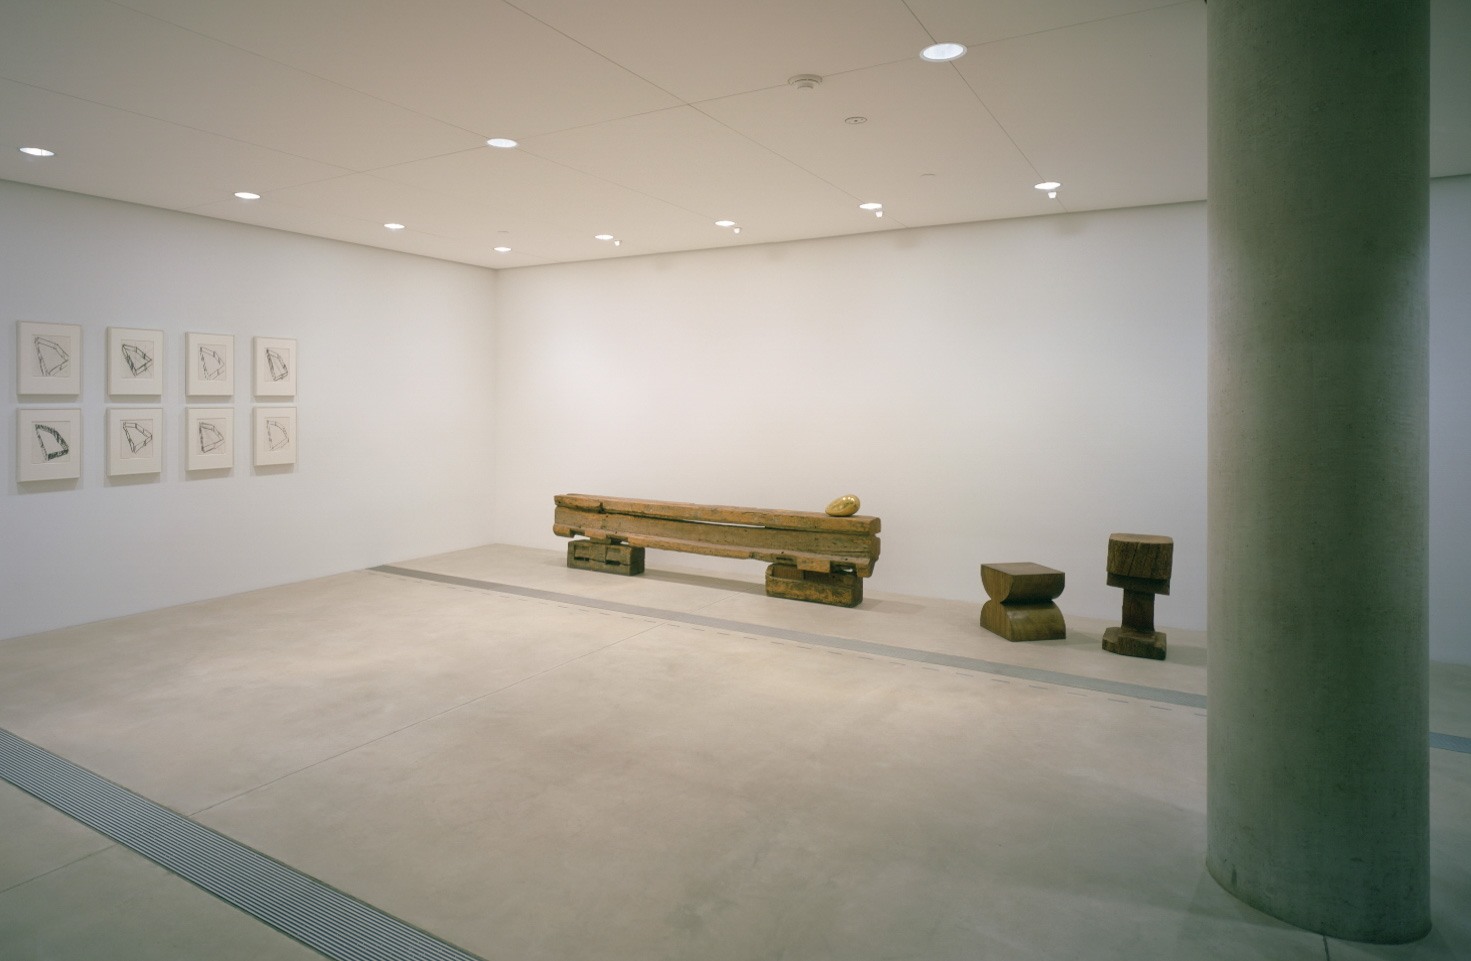 In the Entrance Gallery, there are eight drawings by Serra related to his piece "Twain," and four Brâncuși sculptures on the west wall ("Bench," "Sleeping Muse II" which sits on "Bench," "Stool," and "Watchdog."